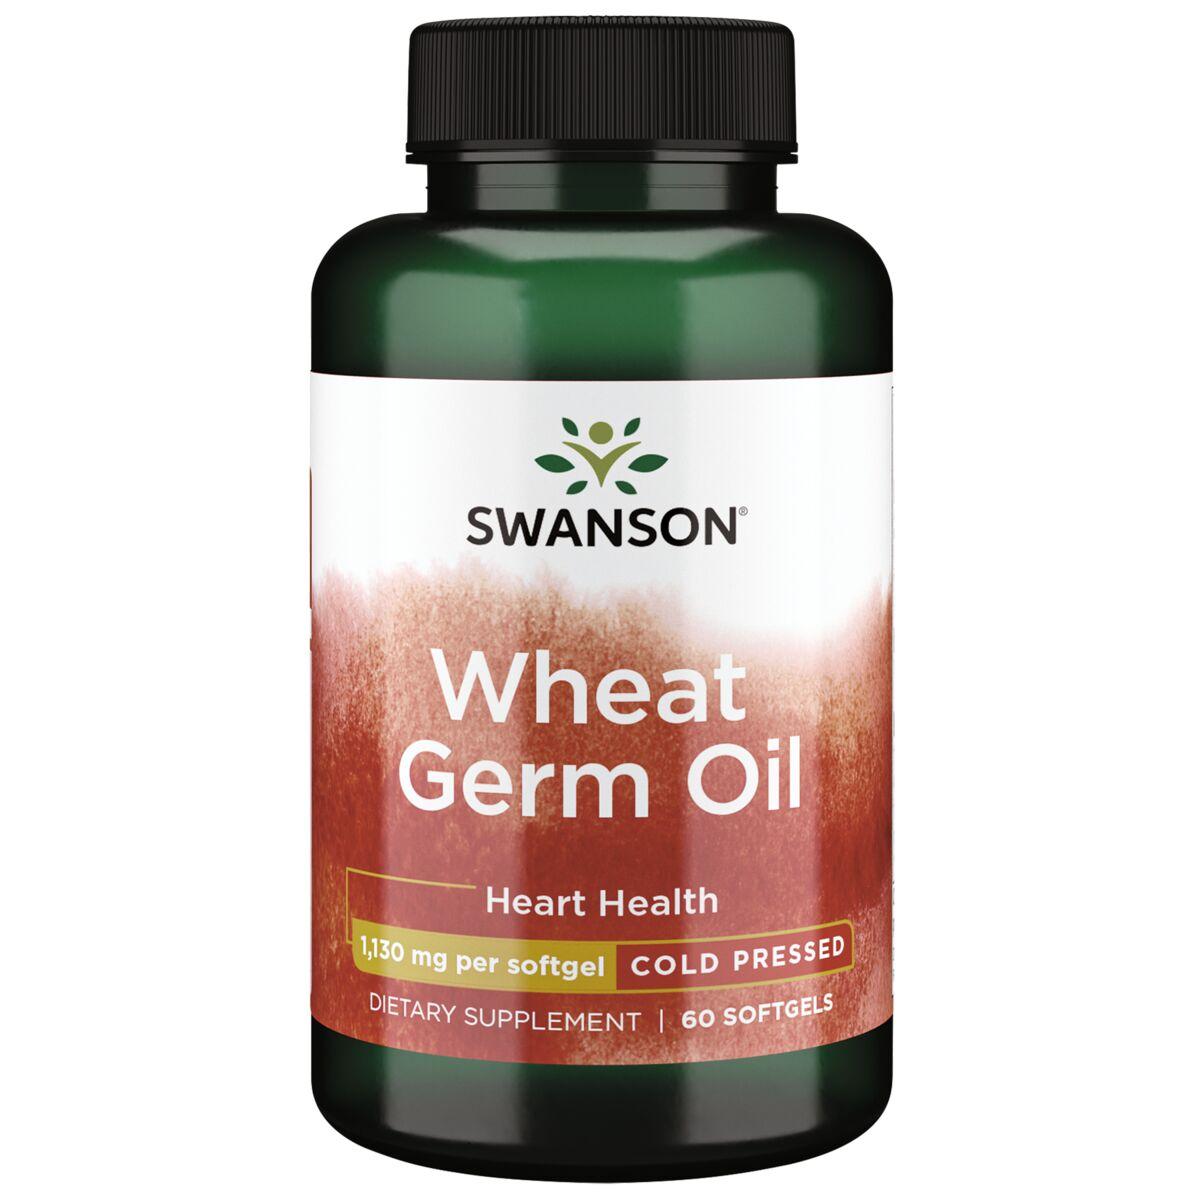 Swanson EFAs Wheat Germ Oil - Cold Pressed Supplement Vitamin 1130 mg 60 Soft Gels